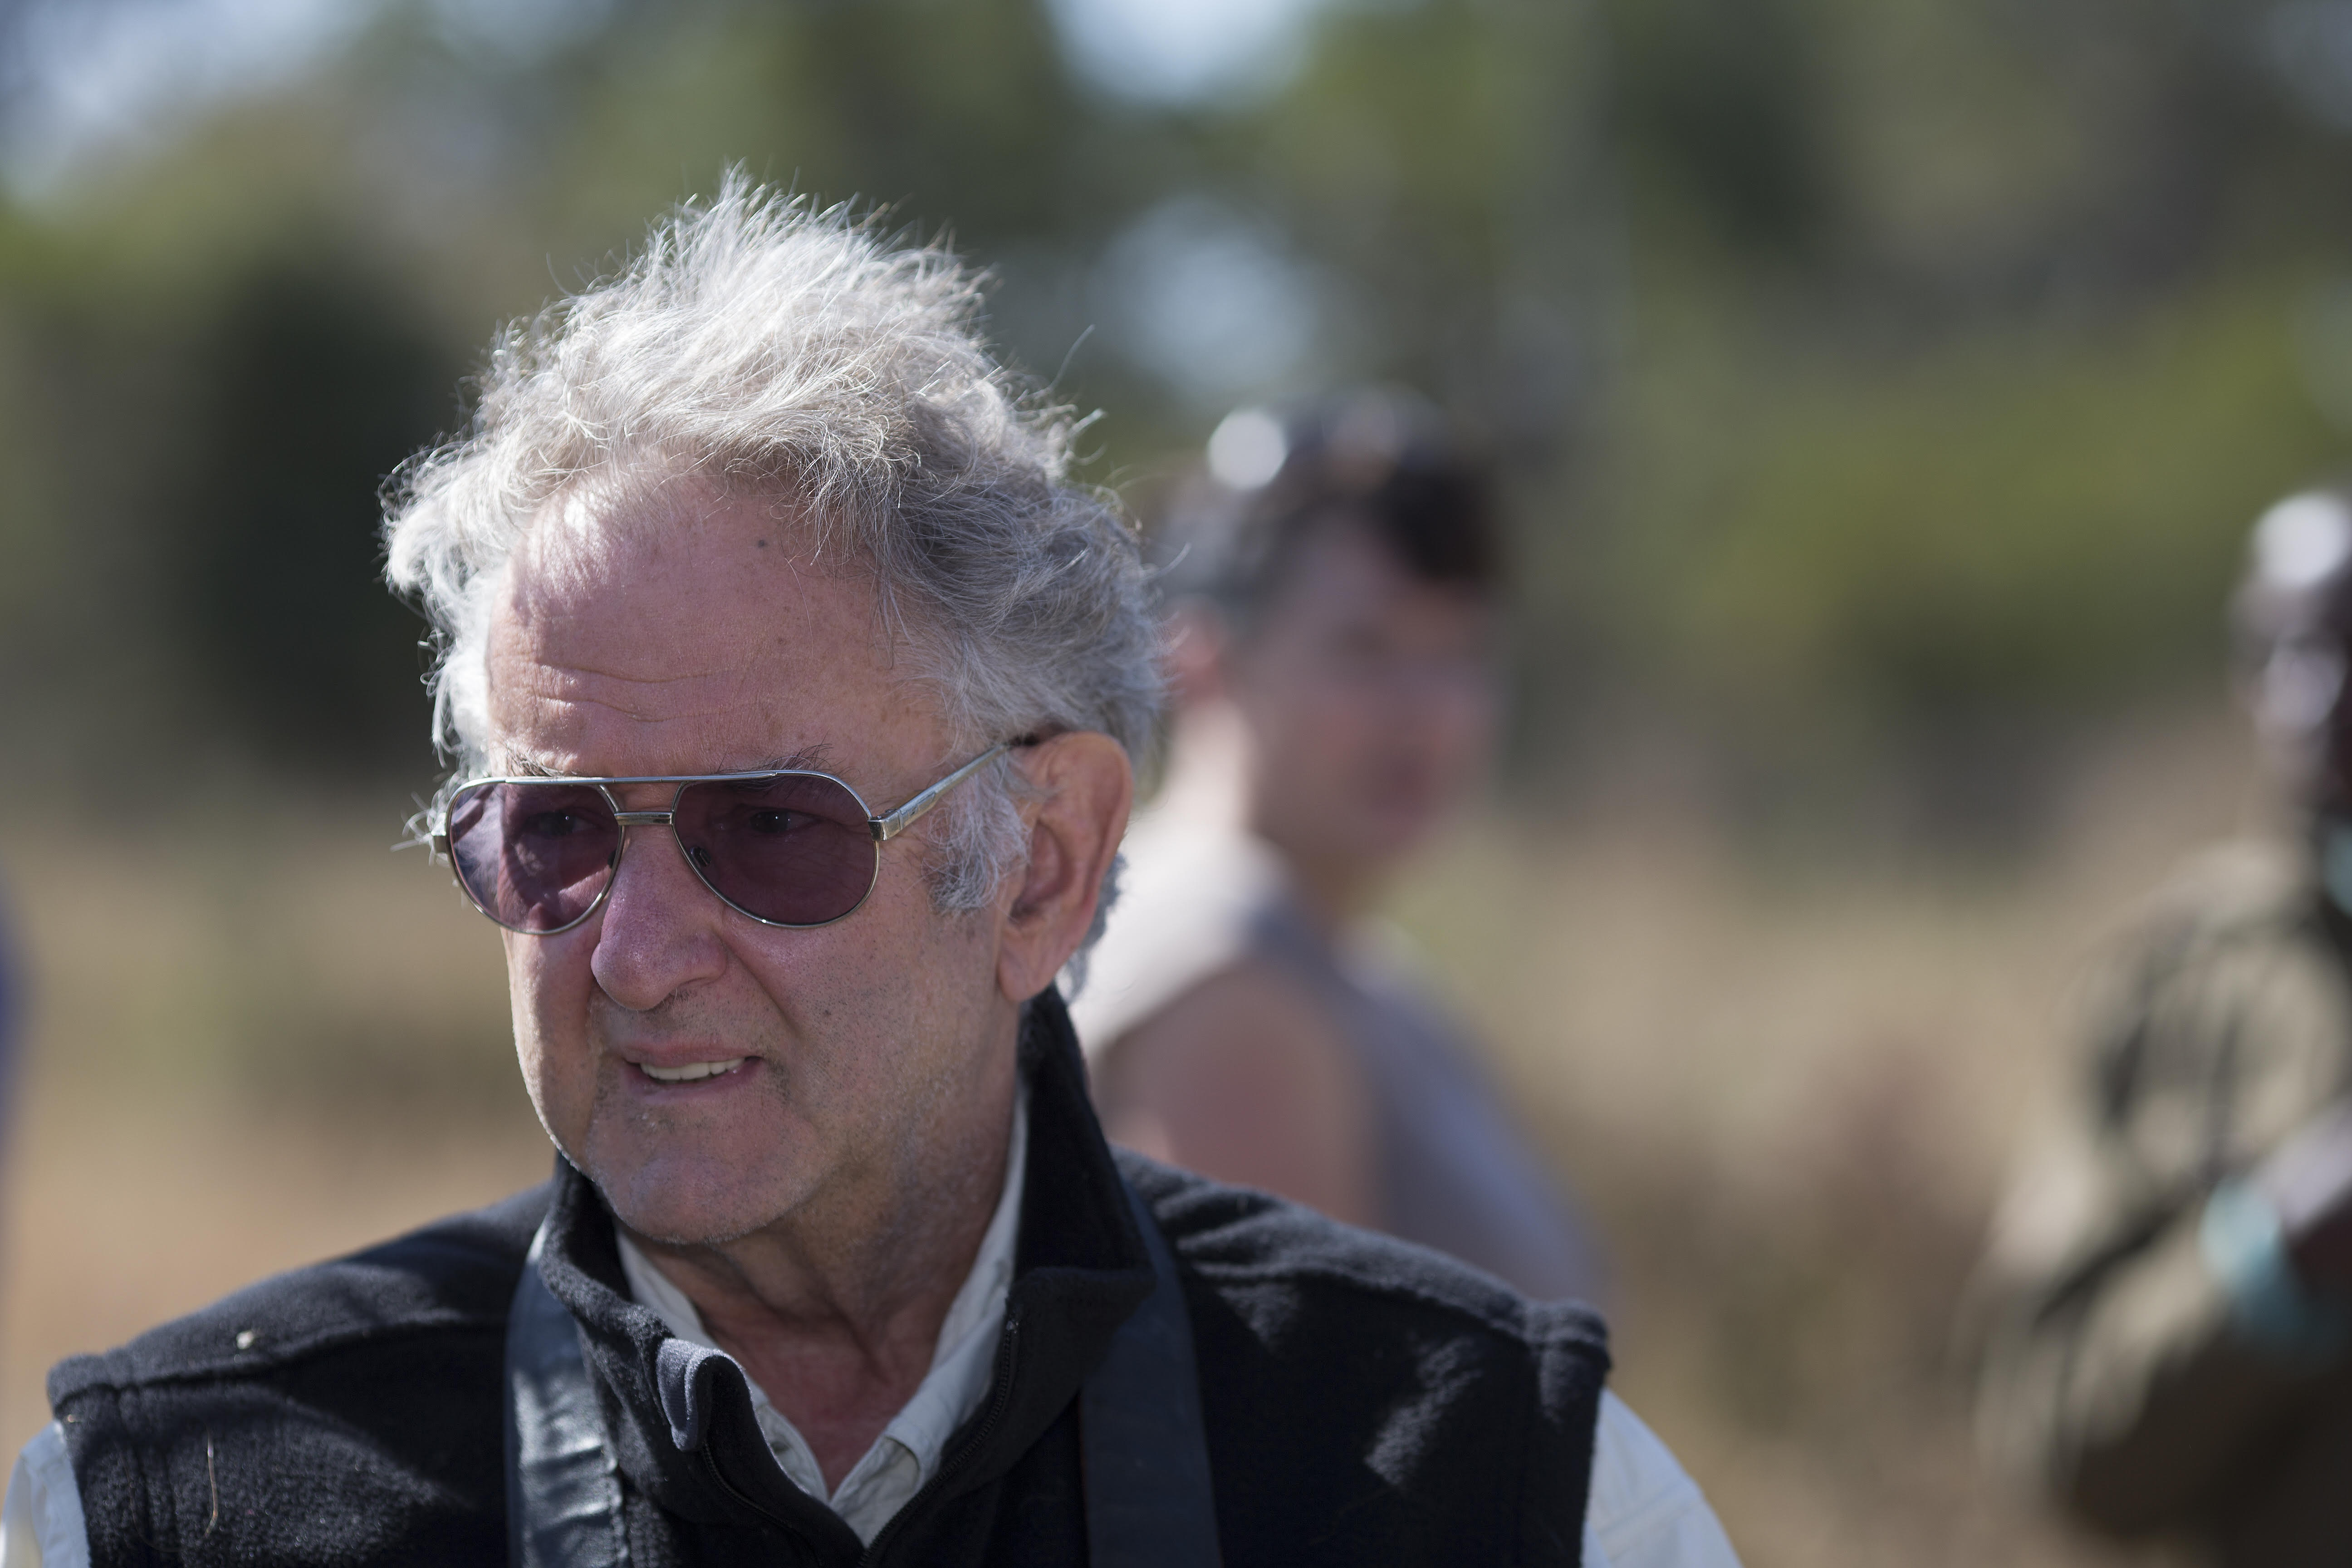 Talking with Stuart Pimm, founding father of biodiversity conservation